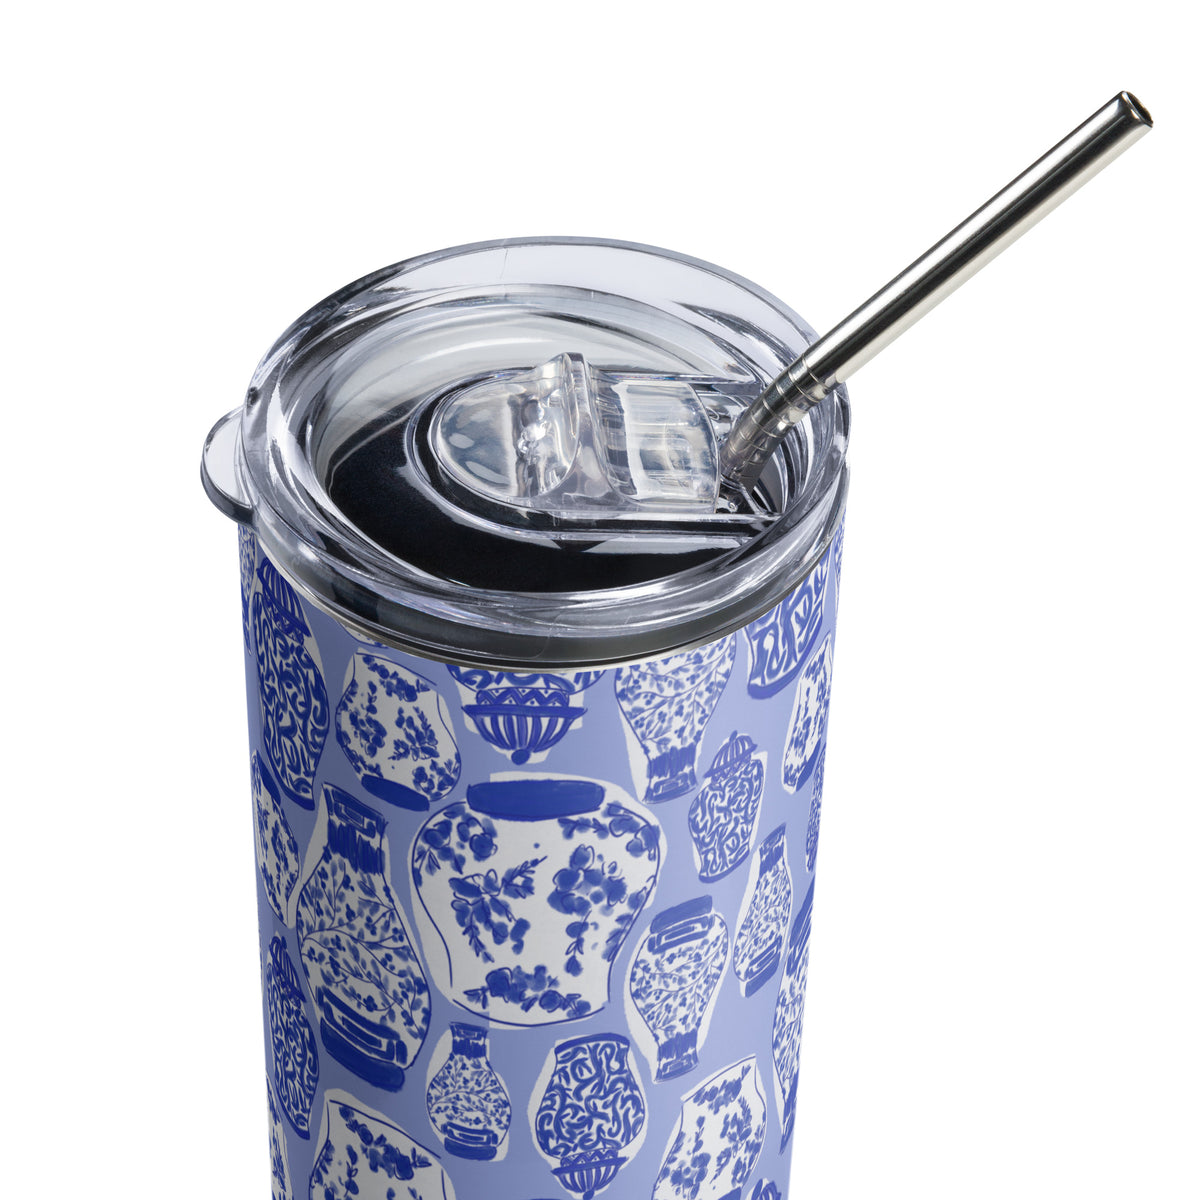 Chinoiserie Jars (Blue) Stainless Steel Tumbler (personalized)